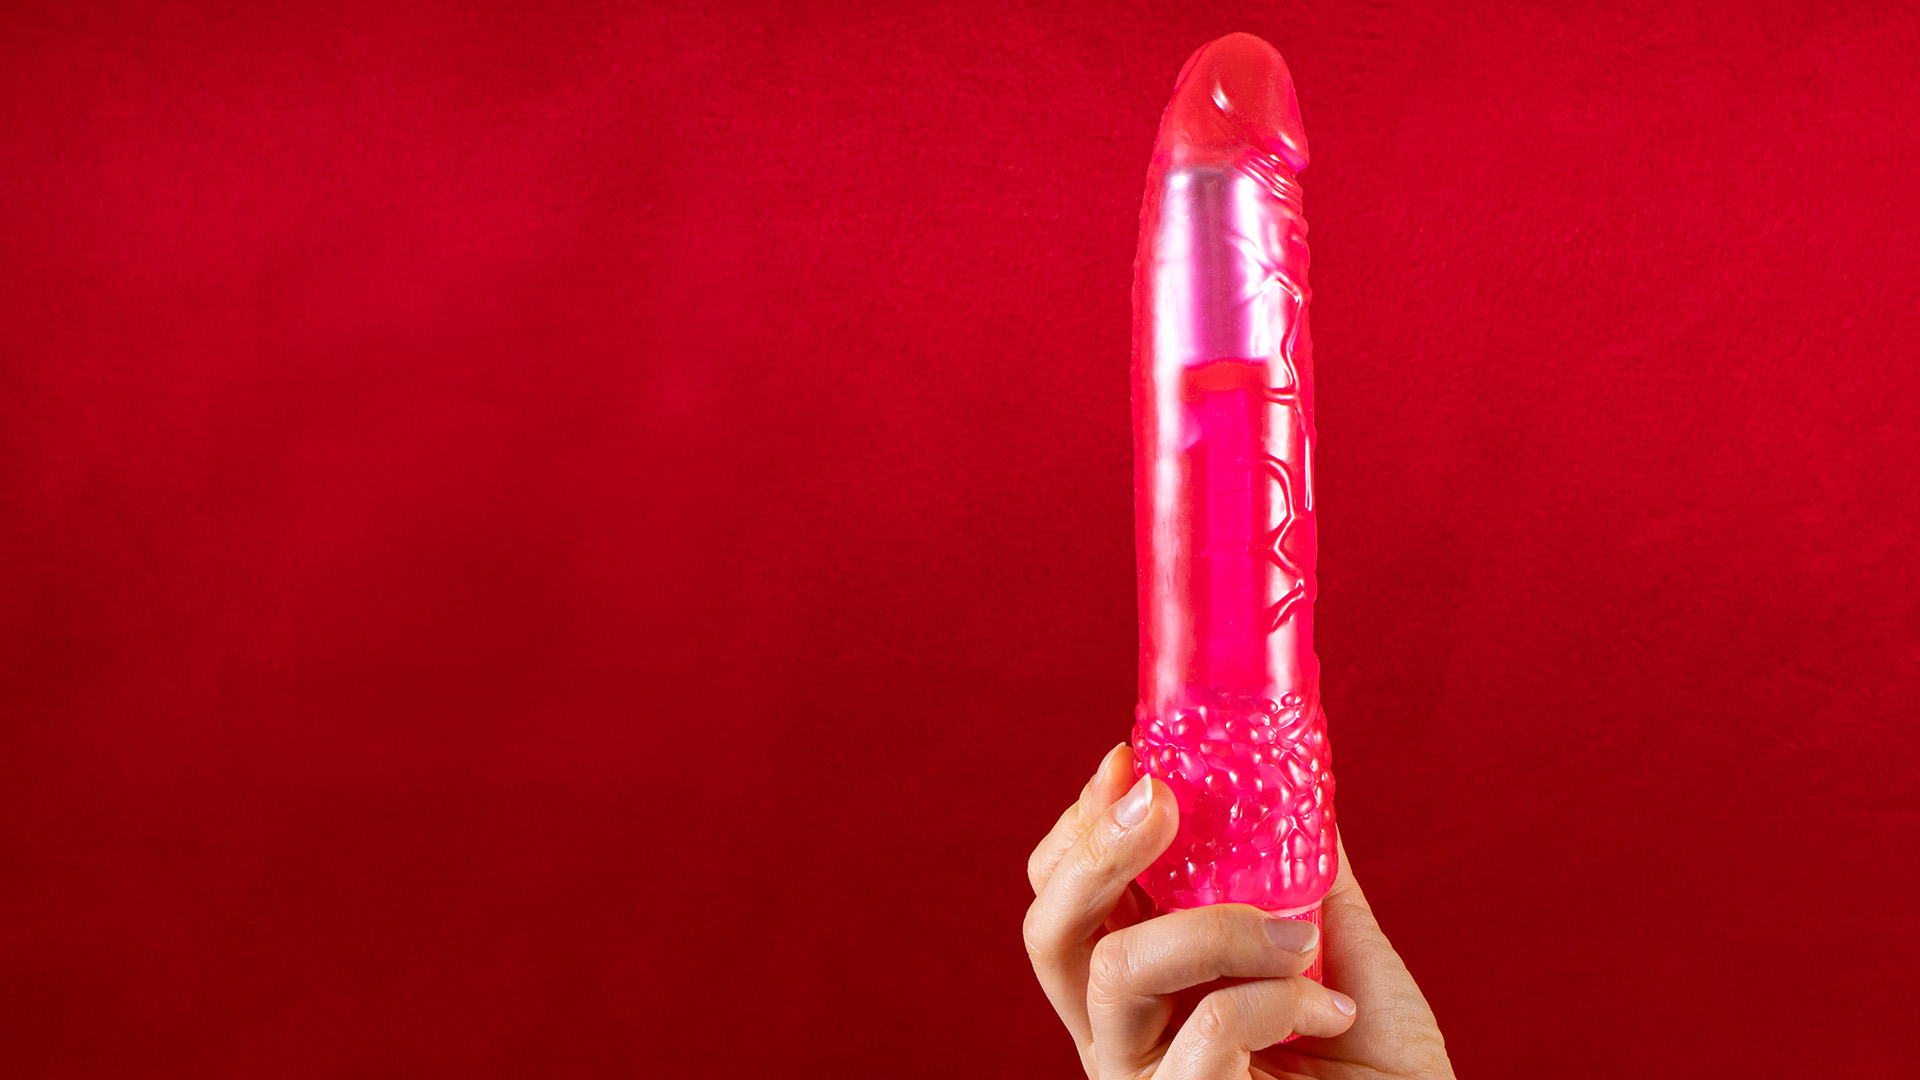 Hand holding a nearly see-through vibrator with pink hue, in front of dark red background.